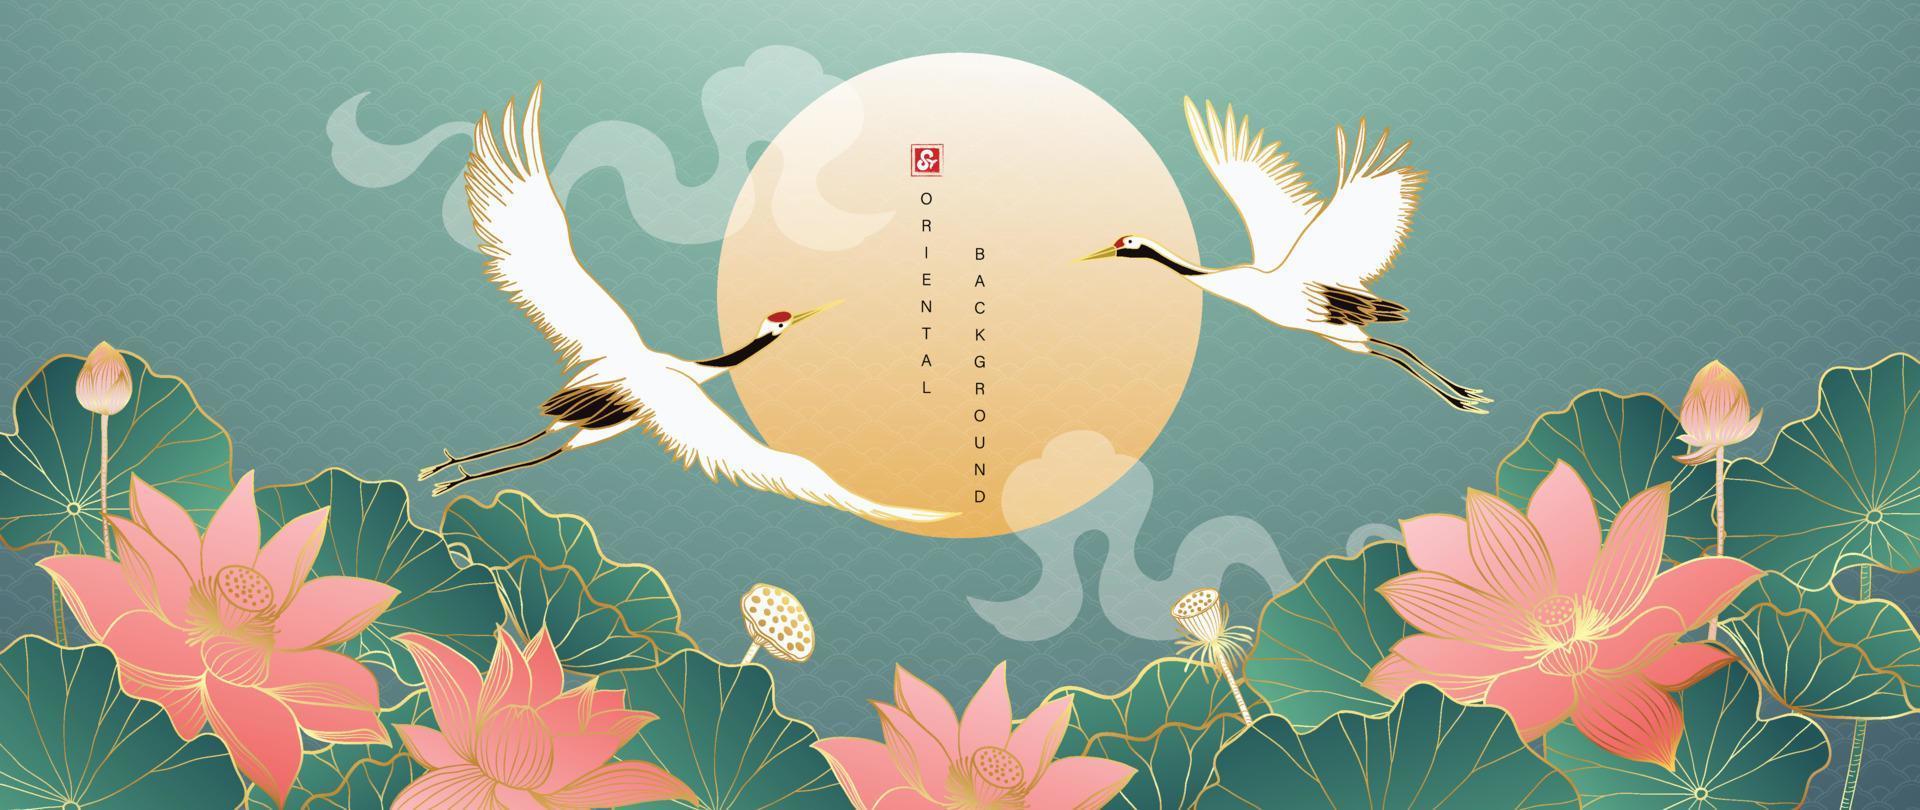 Wallpaper In Japanese Style Stock Photo Picture And Royalty Free Image  Image 79979037